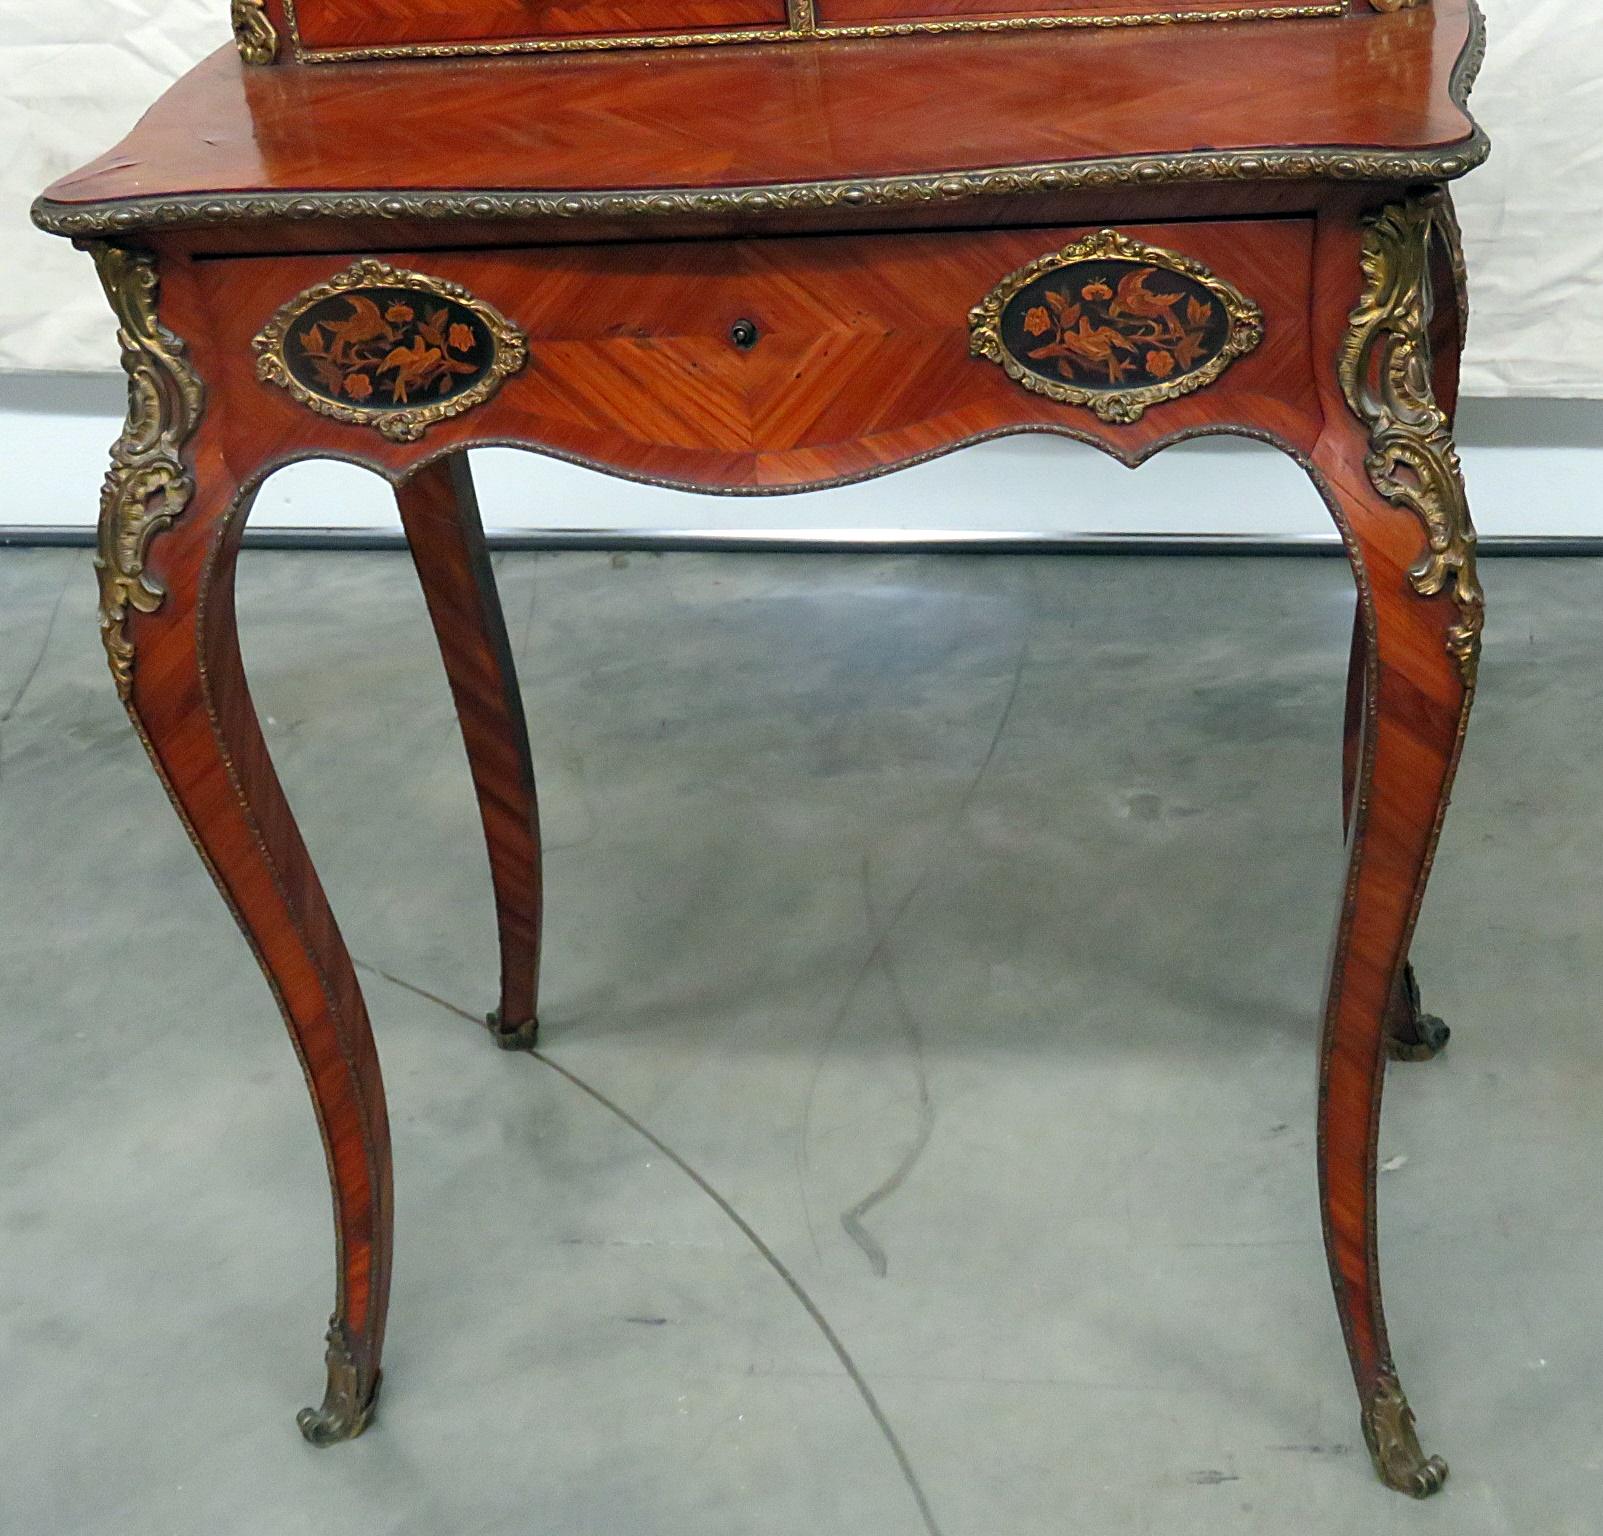 This is a superbly crafted 1870s era ladies writing desk with a cartonnier shelf compartment above the writing surface. The desk features incredible bronze ormolu and inlaid mixed woods. There are very few of these available and this is a very